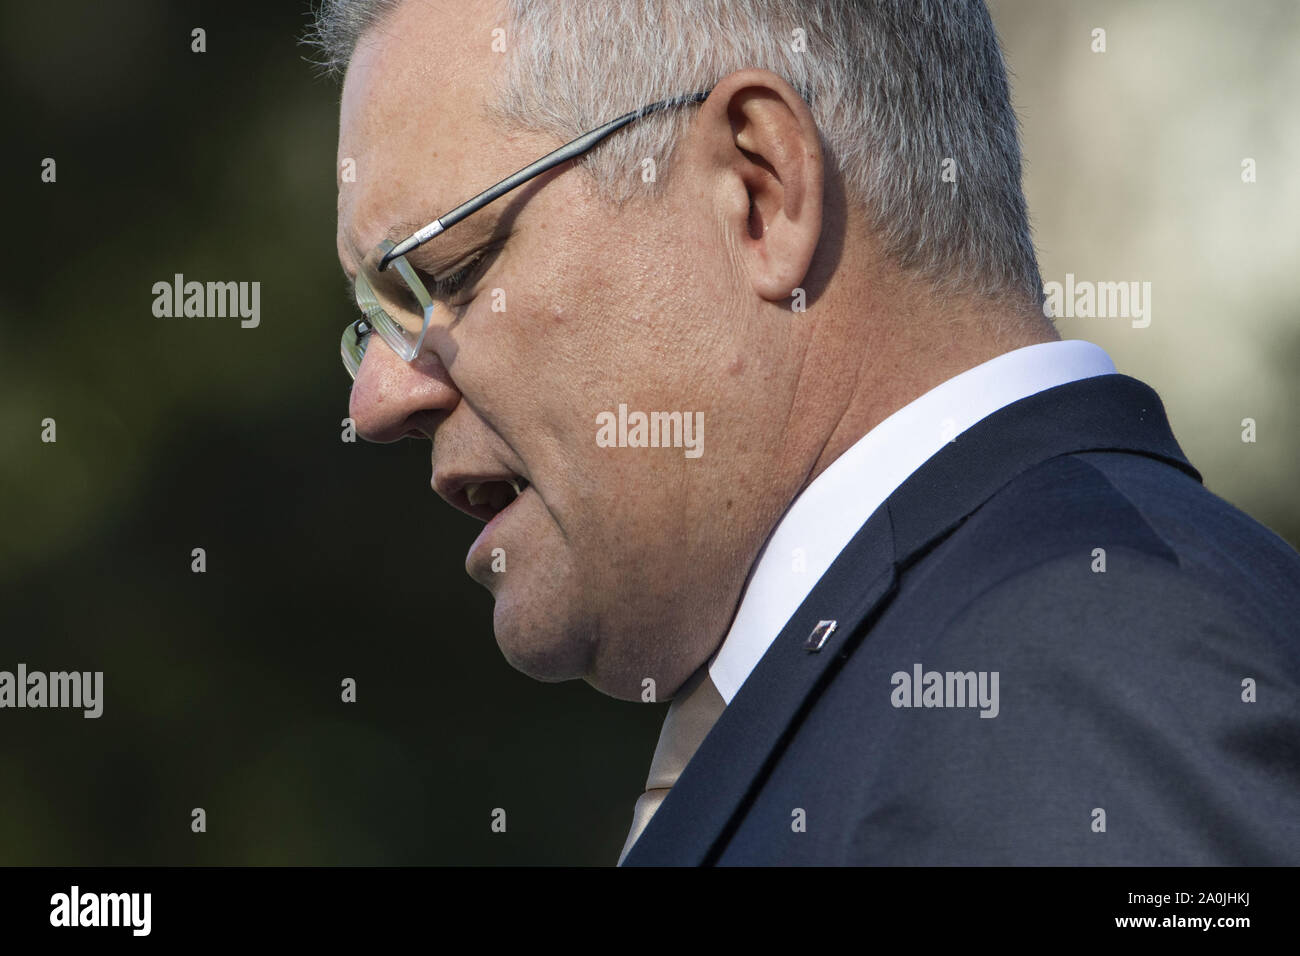 Washington DC, USA . 20th Sep, 2019. Washington DC, USA. 20th Sep, 2019. Prime Minister of Australia Scott Morrison speaks from the South Lawn of the White House during a state arrival ceremony in Washington, DC on Friday, September 20, 2019. The occasion marks the second state visit of Donald Trump's presidency. Credit: UPI/Alamy Live News Stock Photo